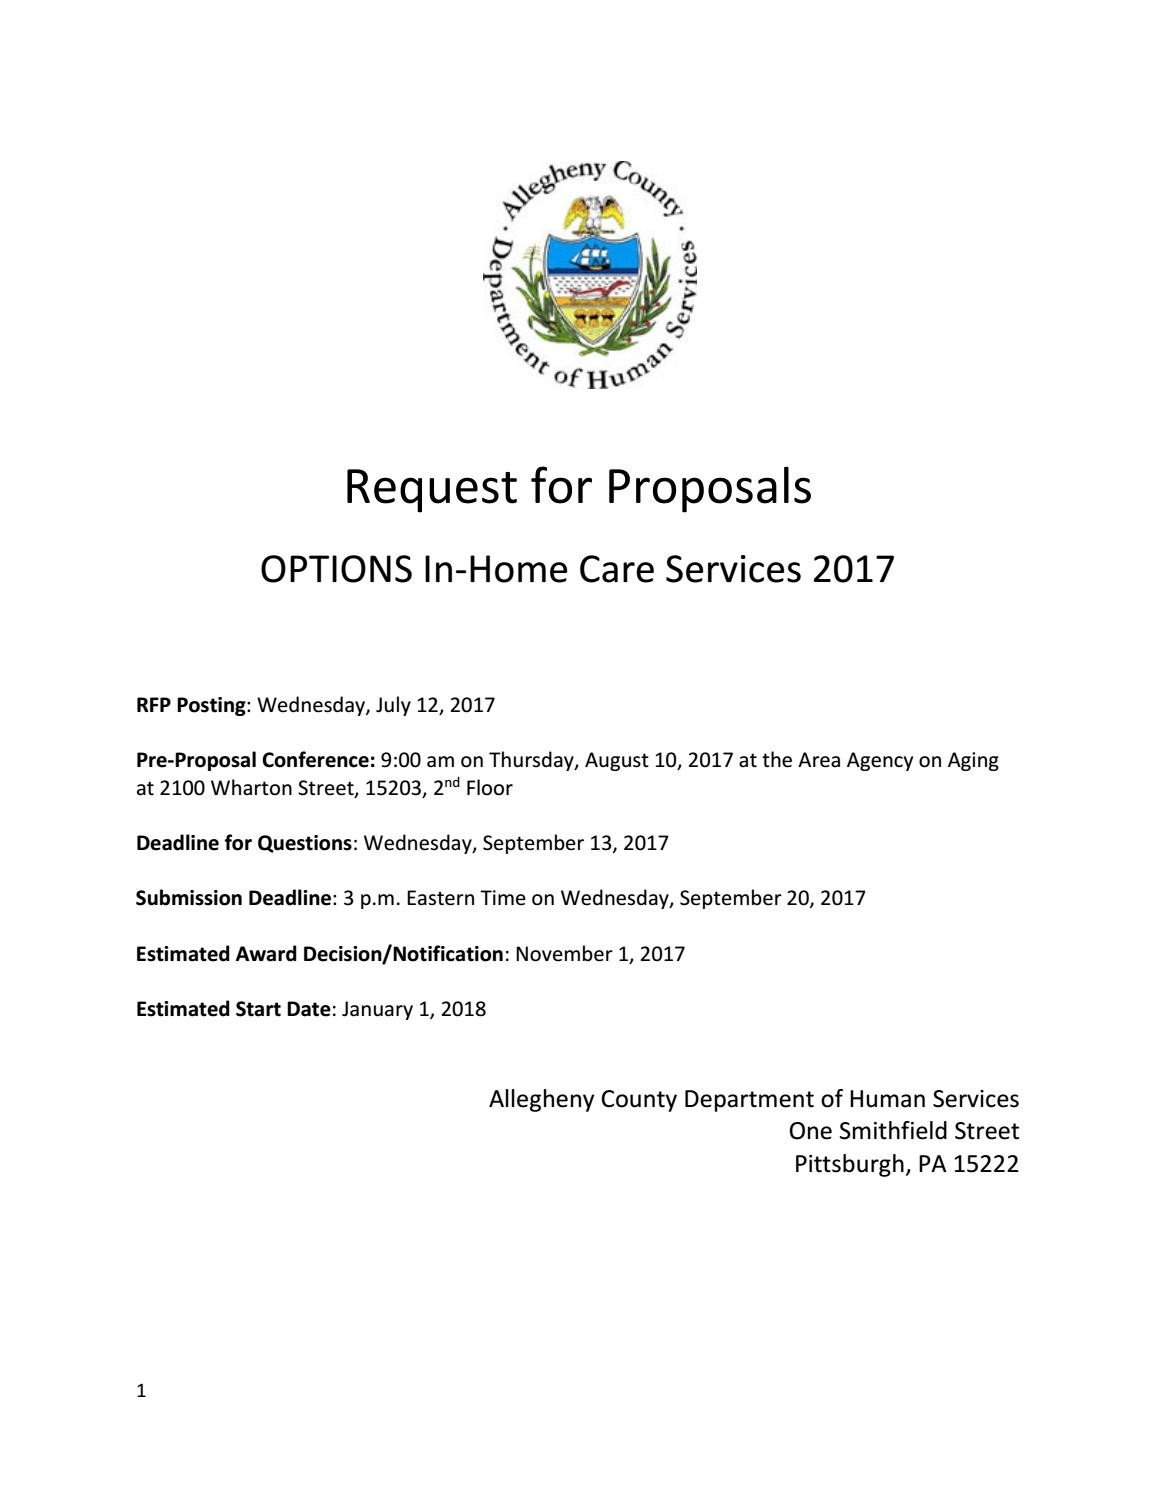 Rfp For Options In-Home Care Services 2017Acdhs - Issuu  Blank Calendar – 9 Free Printable Microsoft Word Templates – 15219